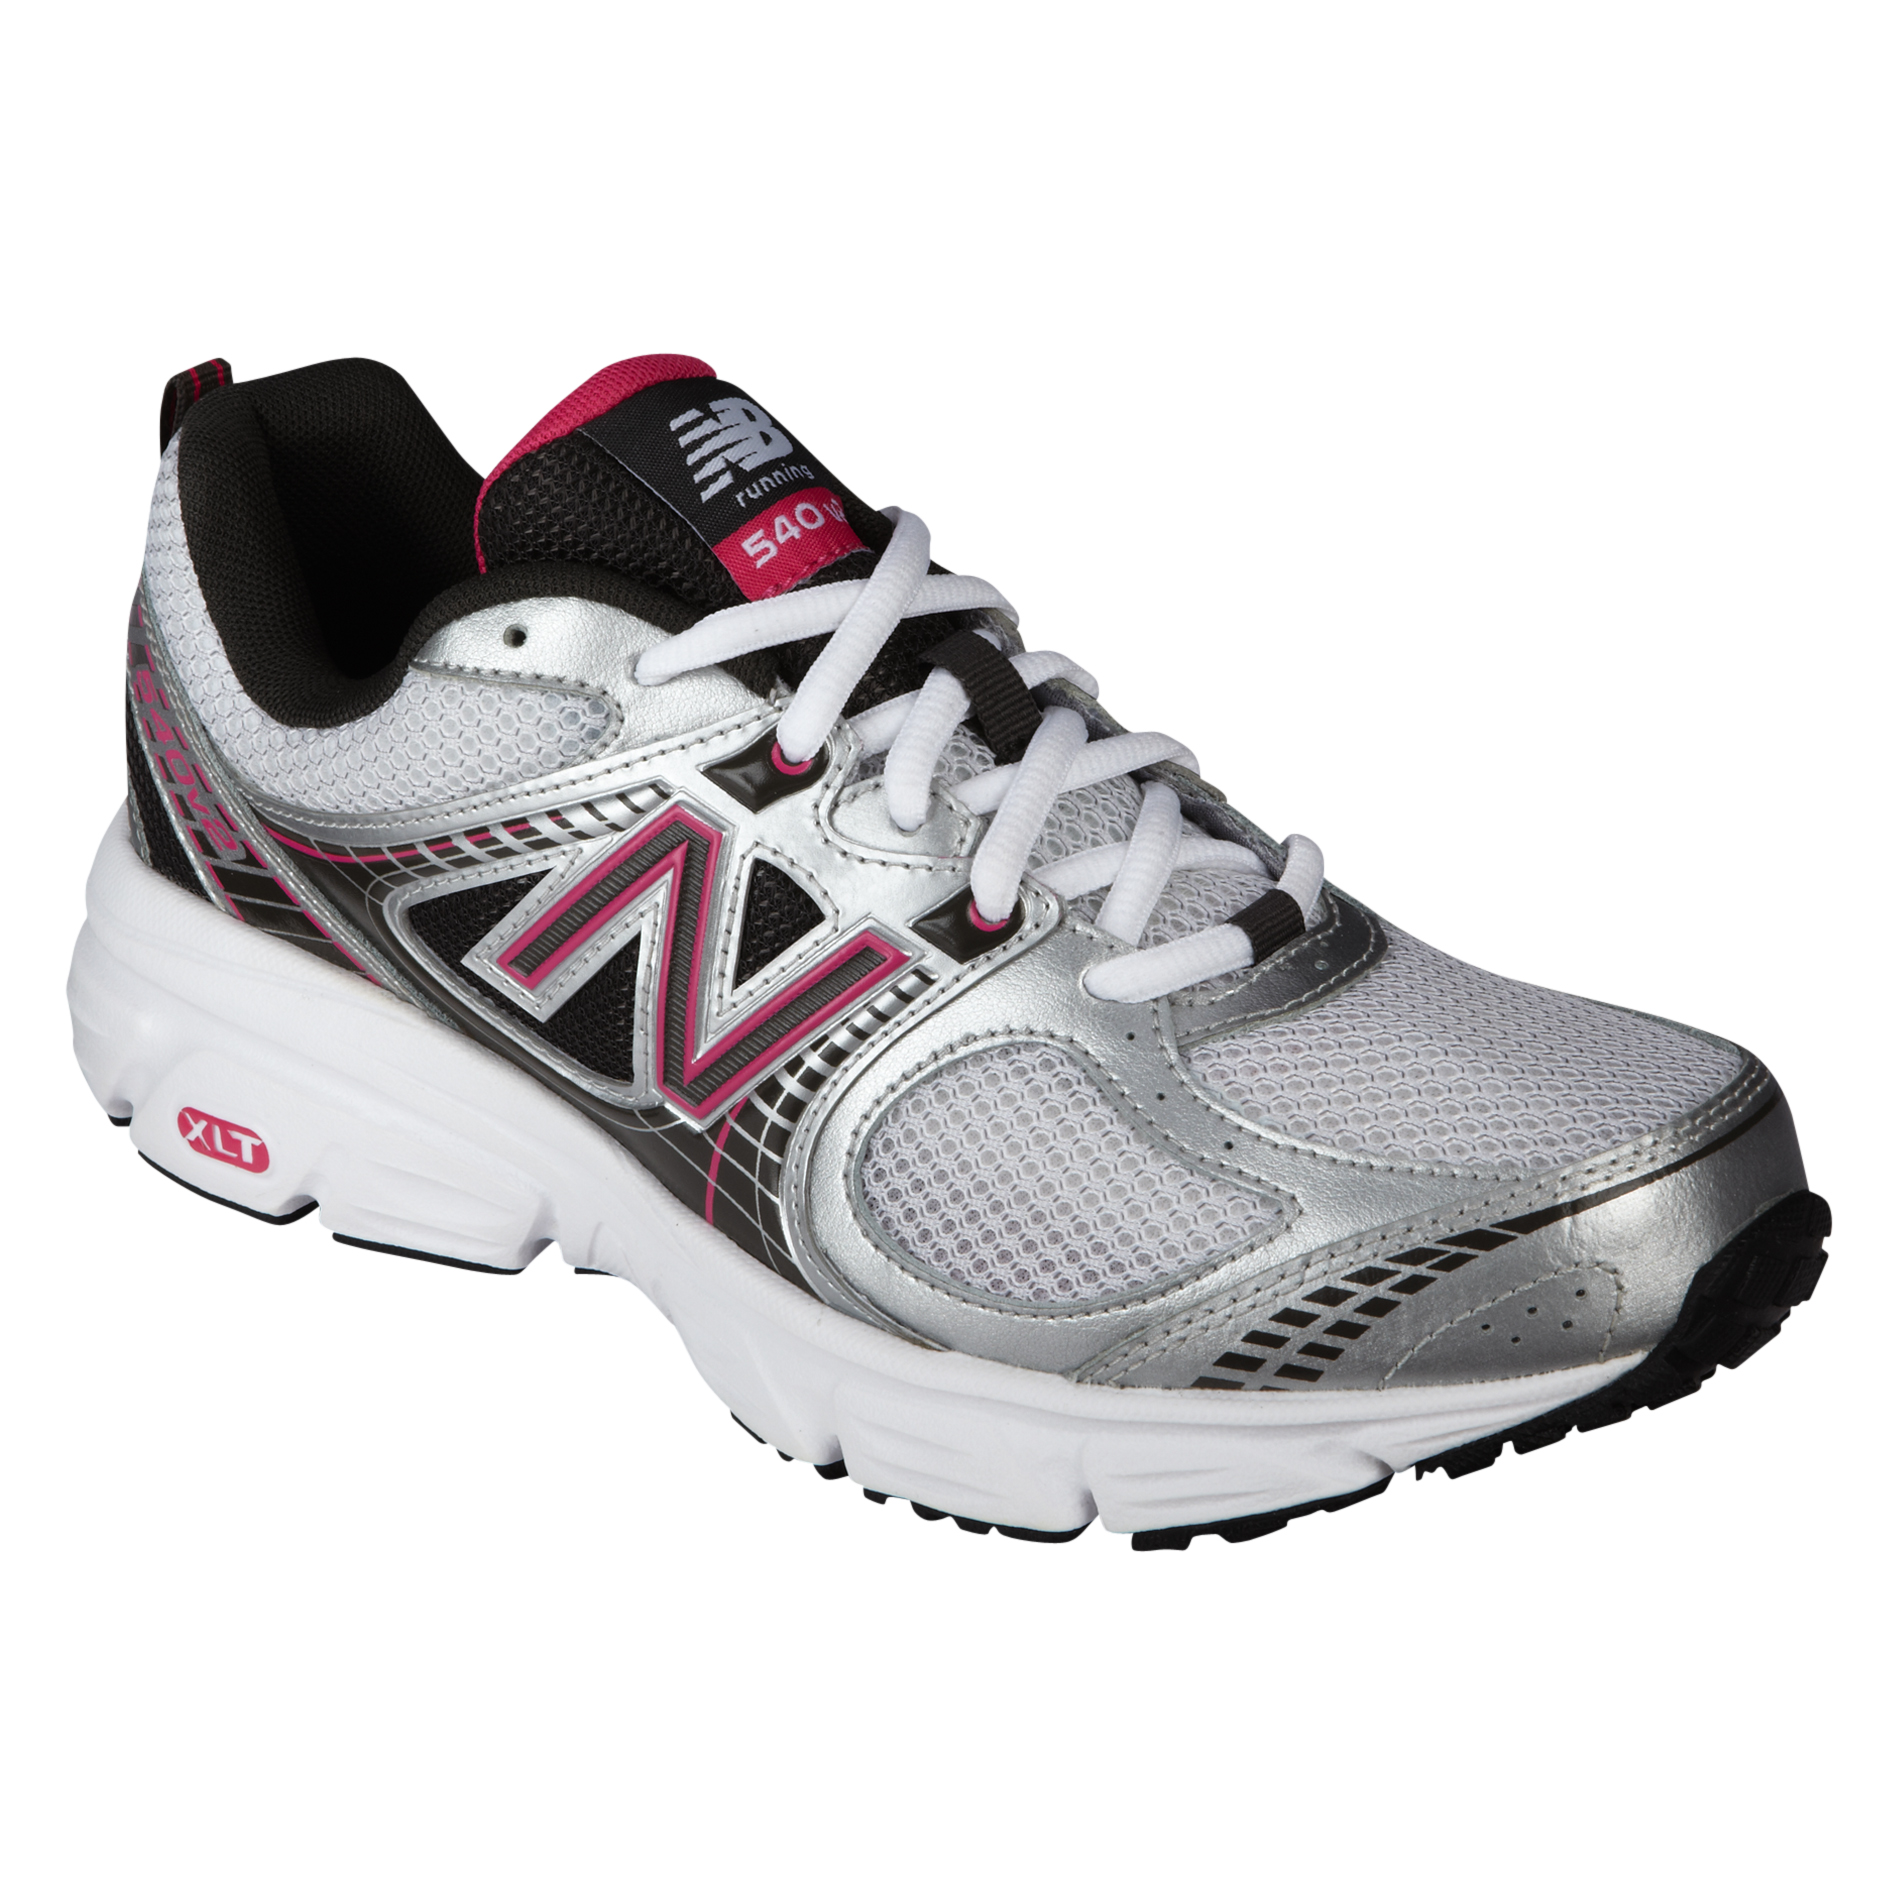 New Balance Women's 540v2 Silver/Pink Running Shoes